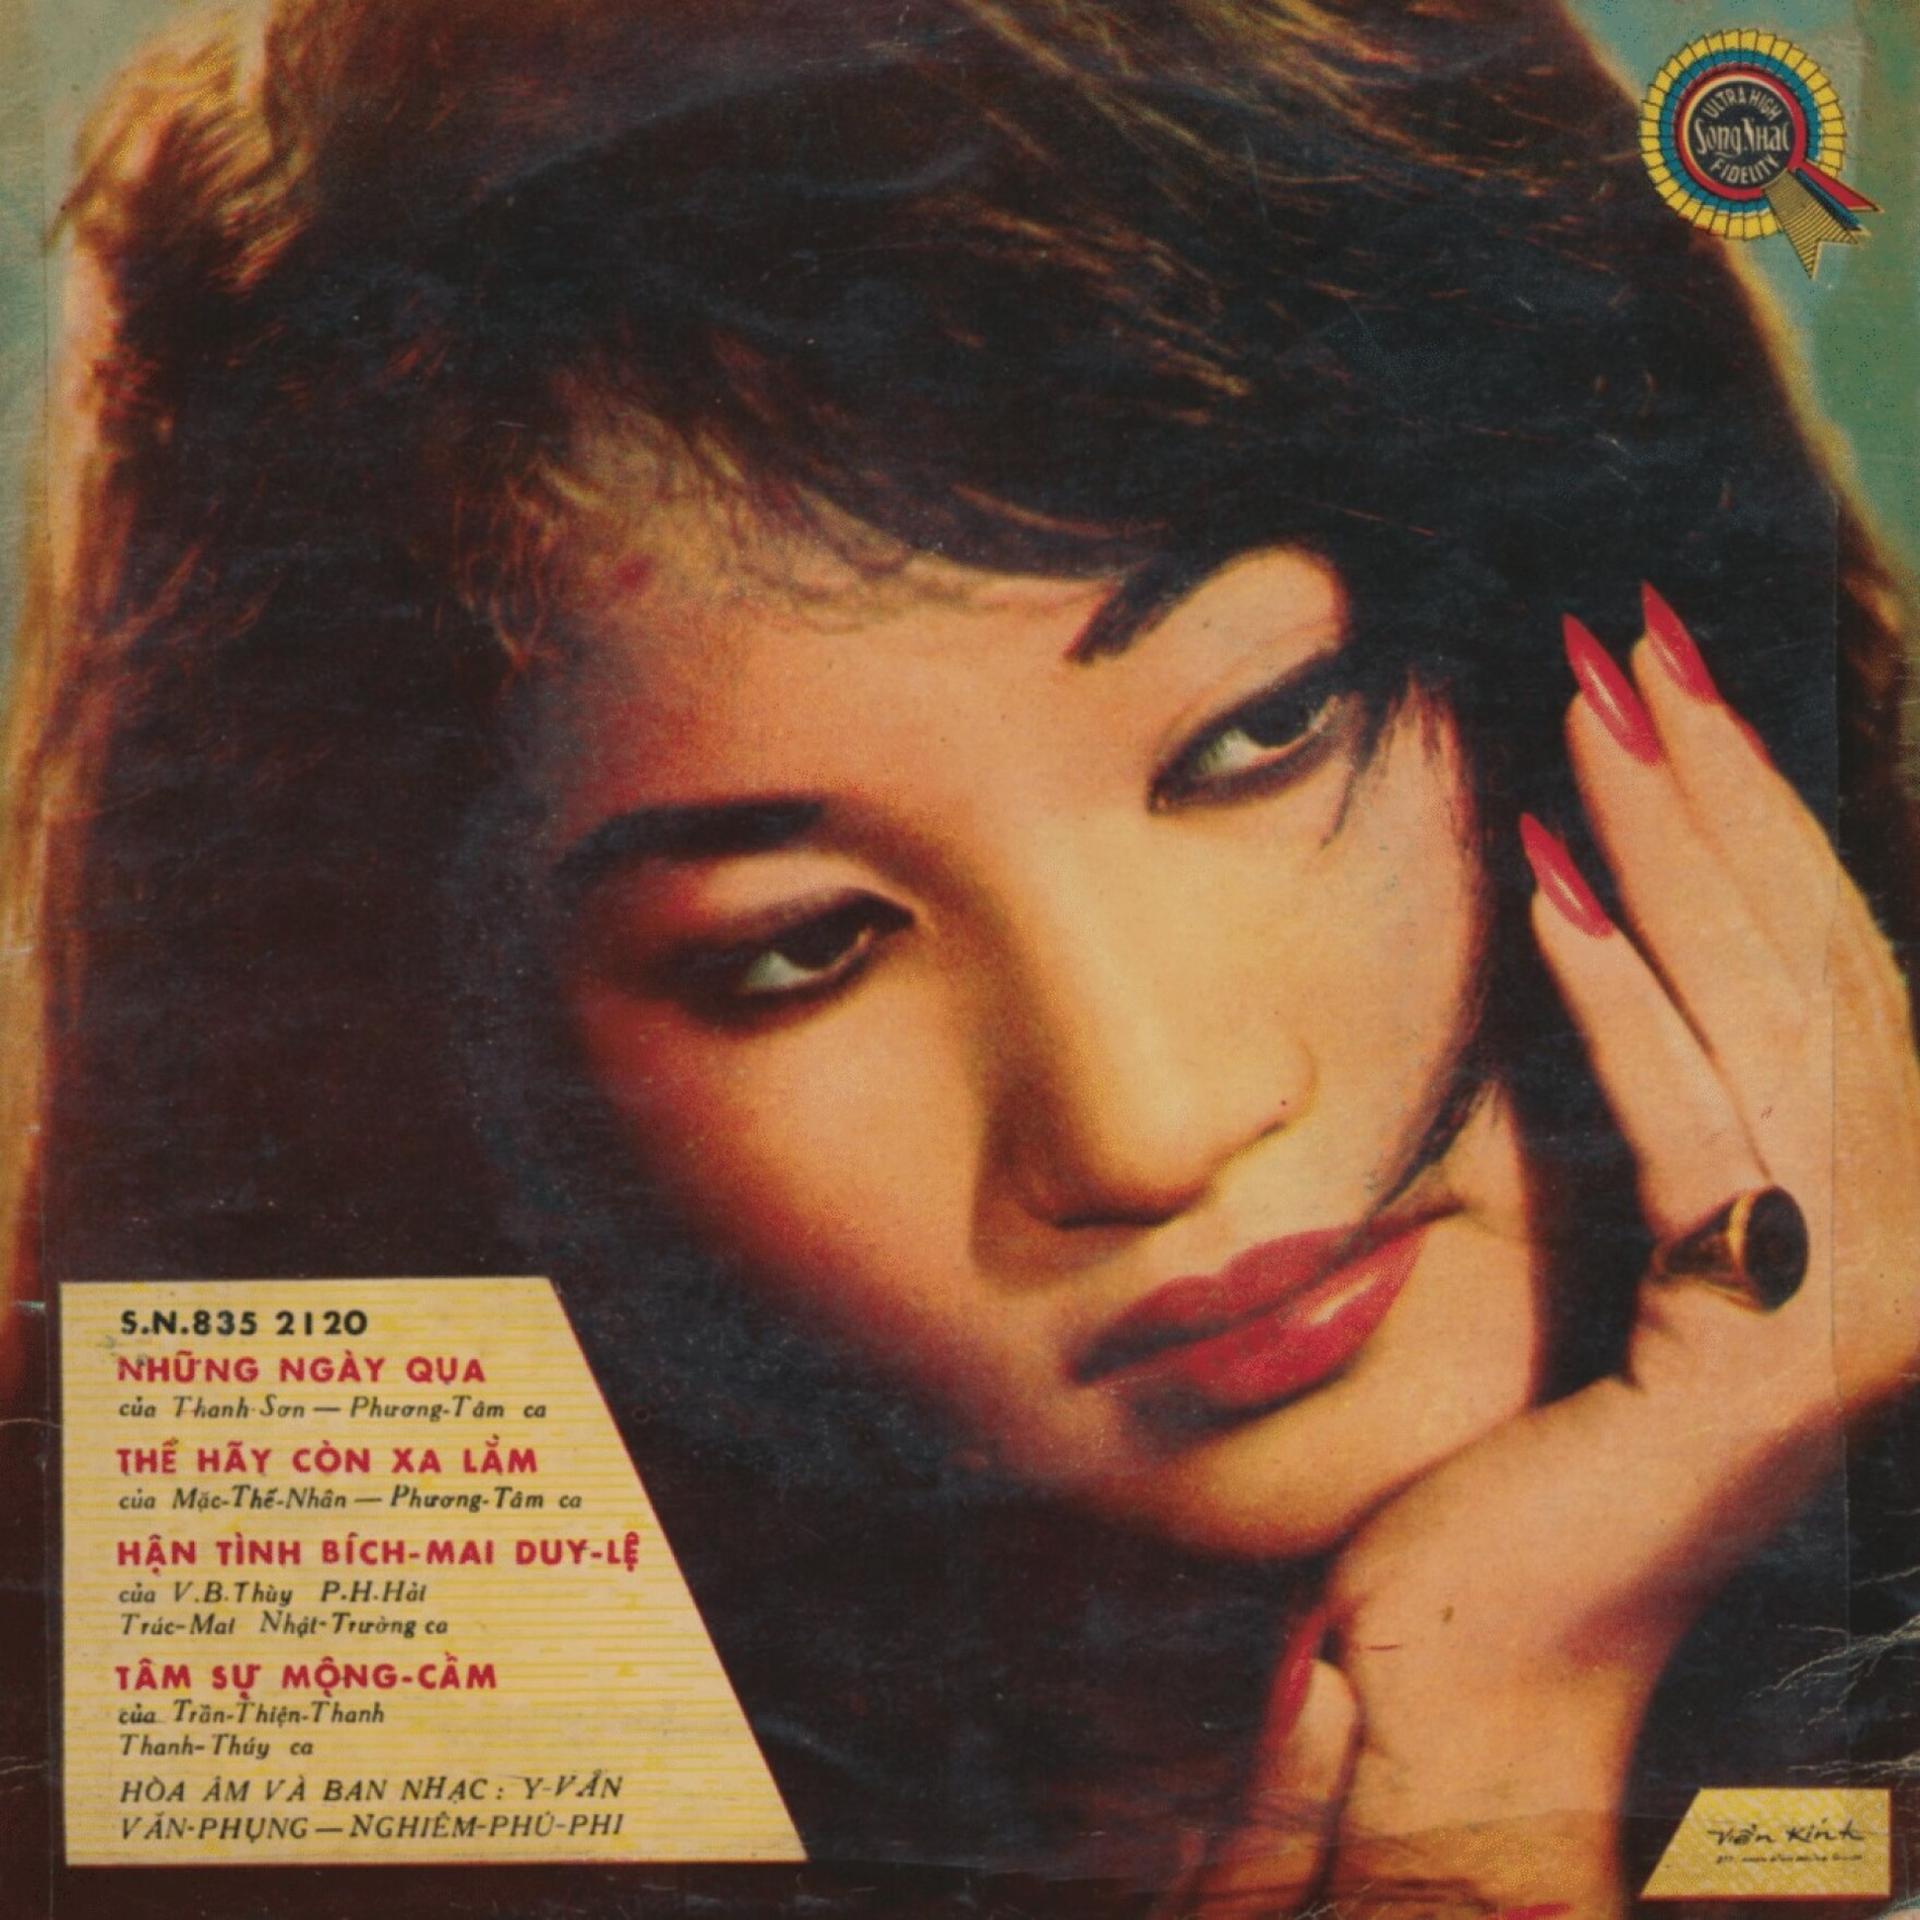 Between 1964 and 1966, Phương Tâm recorded a collection of hits — twist and surf styles, jazz tunes and early rock songs.